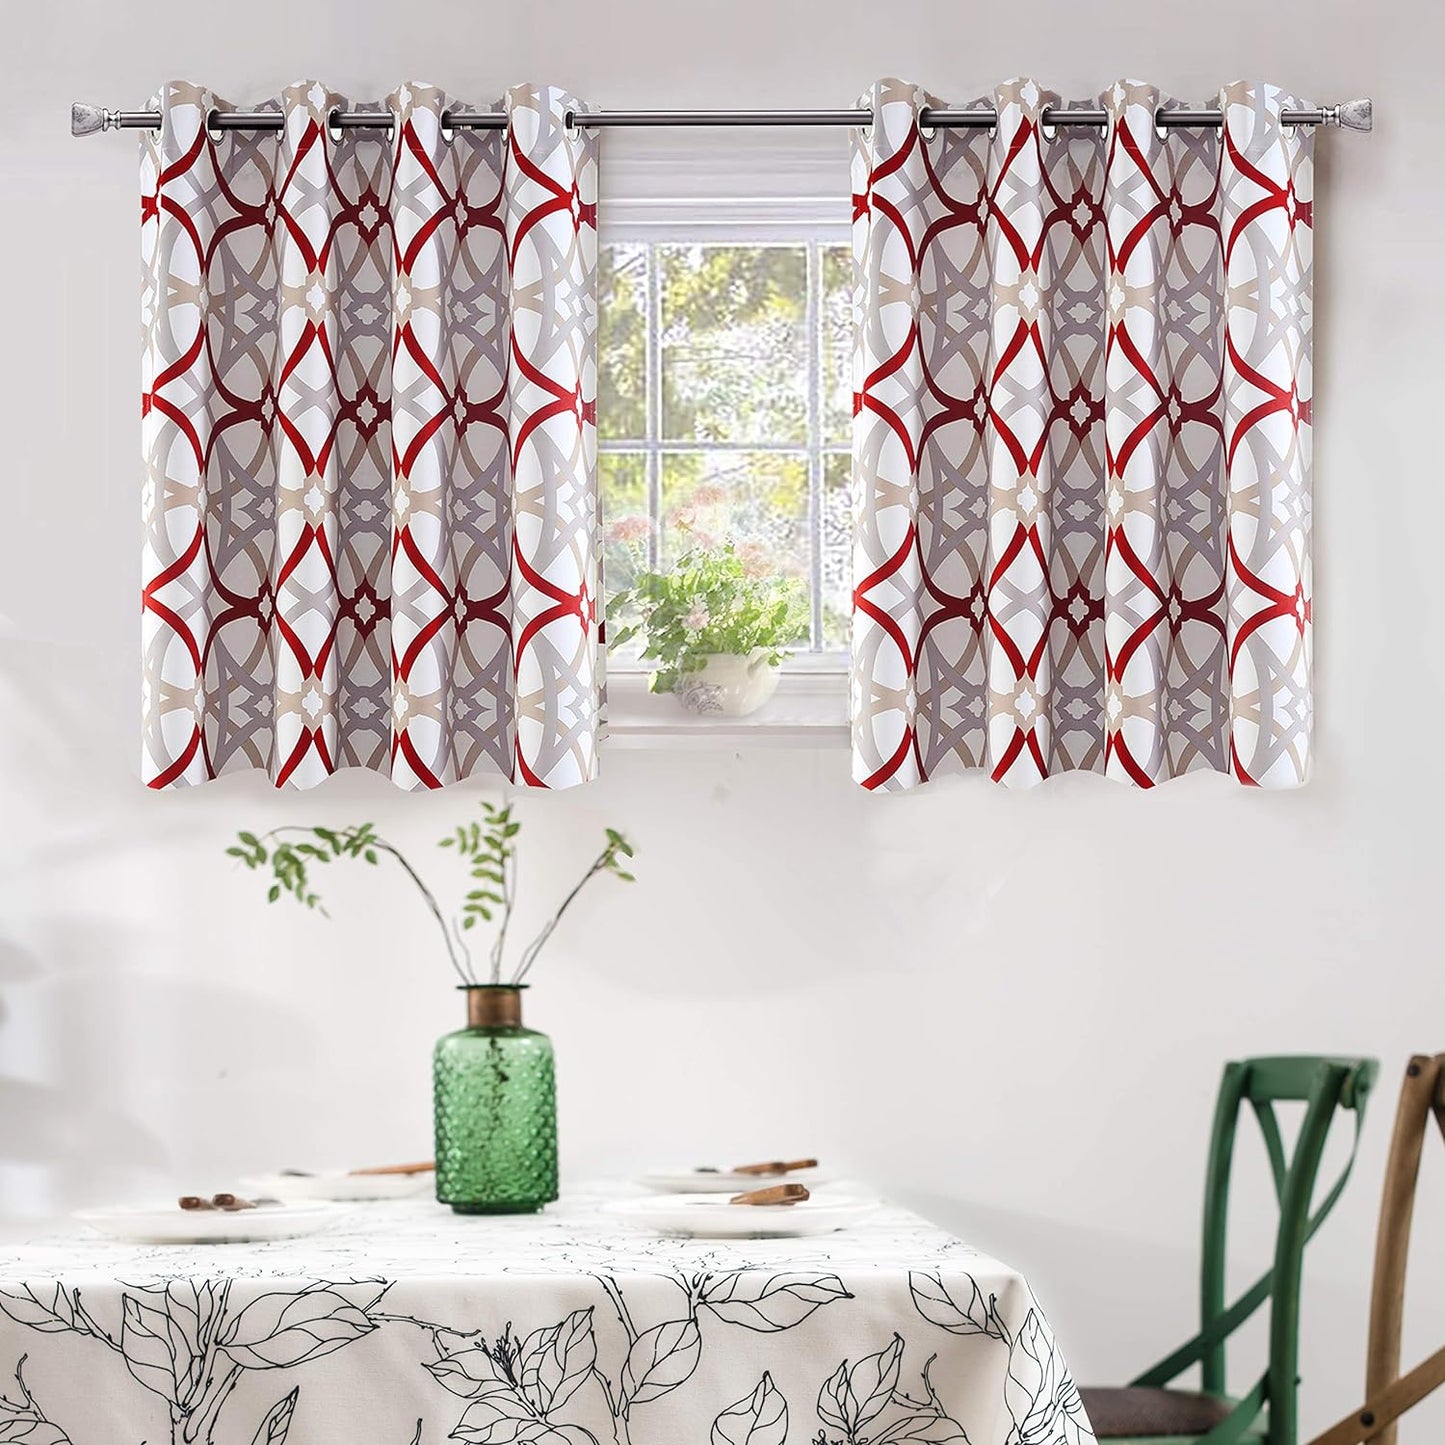 Driftaway Alexander Thermal Blackout Grommet Unlined Window Curtains Spiral Geo Trellis Pattern Set of 2 Panels Each Size 52 Inch by 84 Inch Red and Gray  DriftAway Red/Gray 52''X36'' 